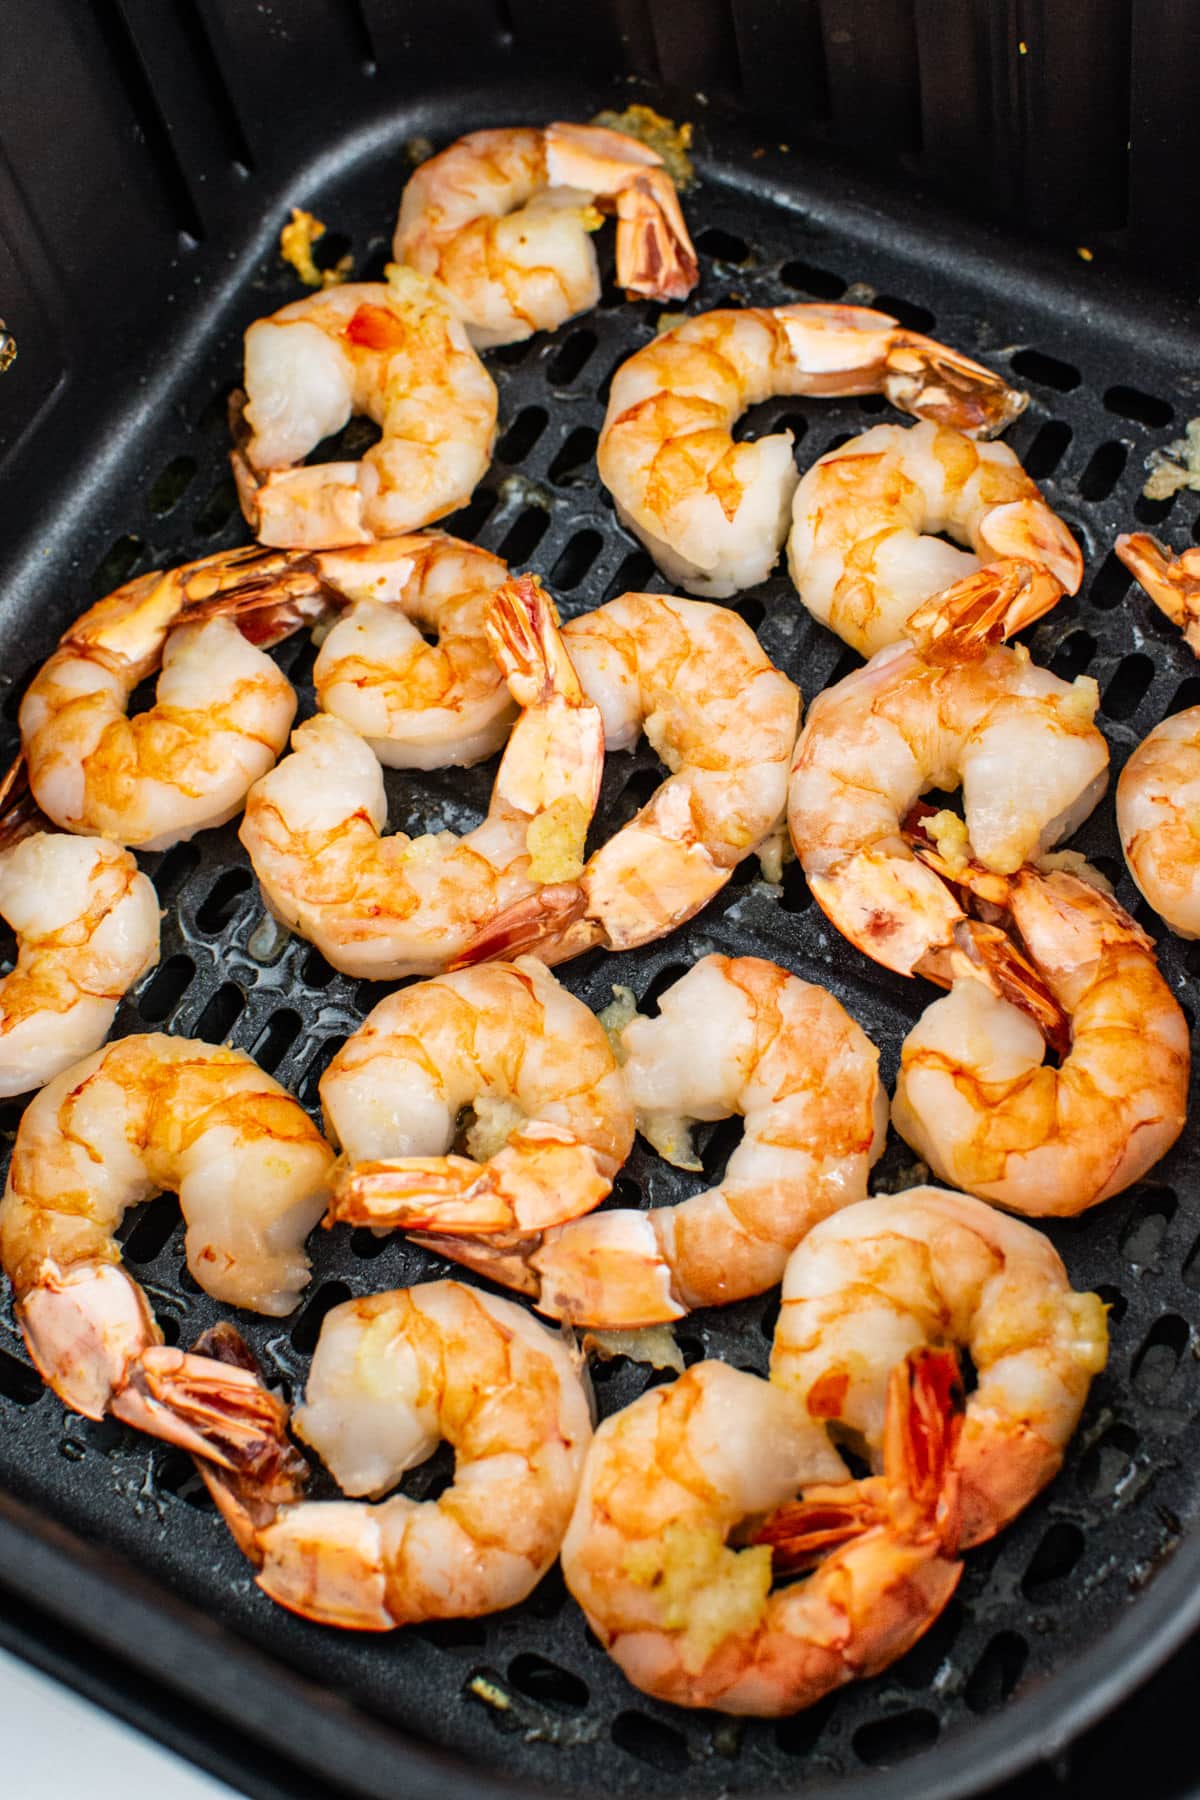 Close look at cooked shrimps in the Cosori air fryer basket.